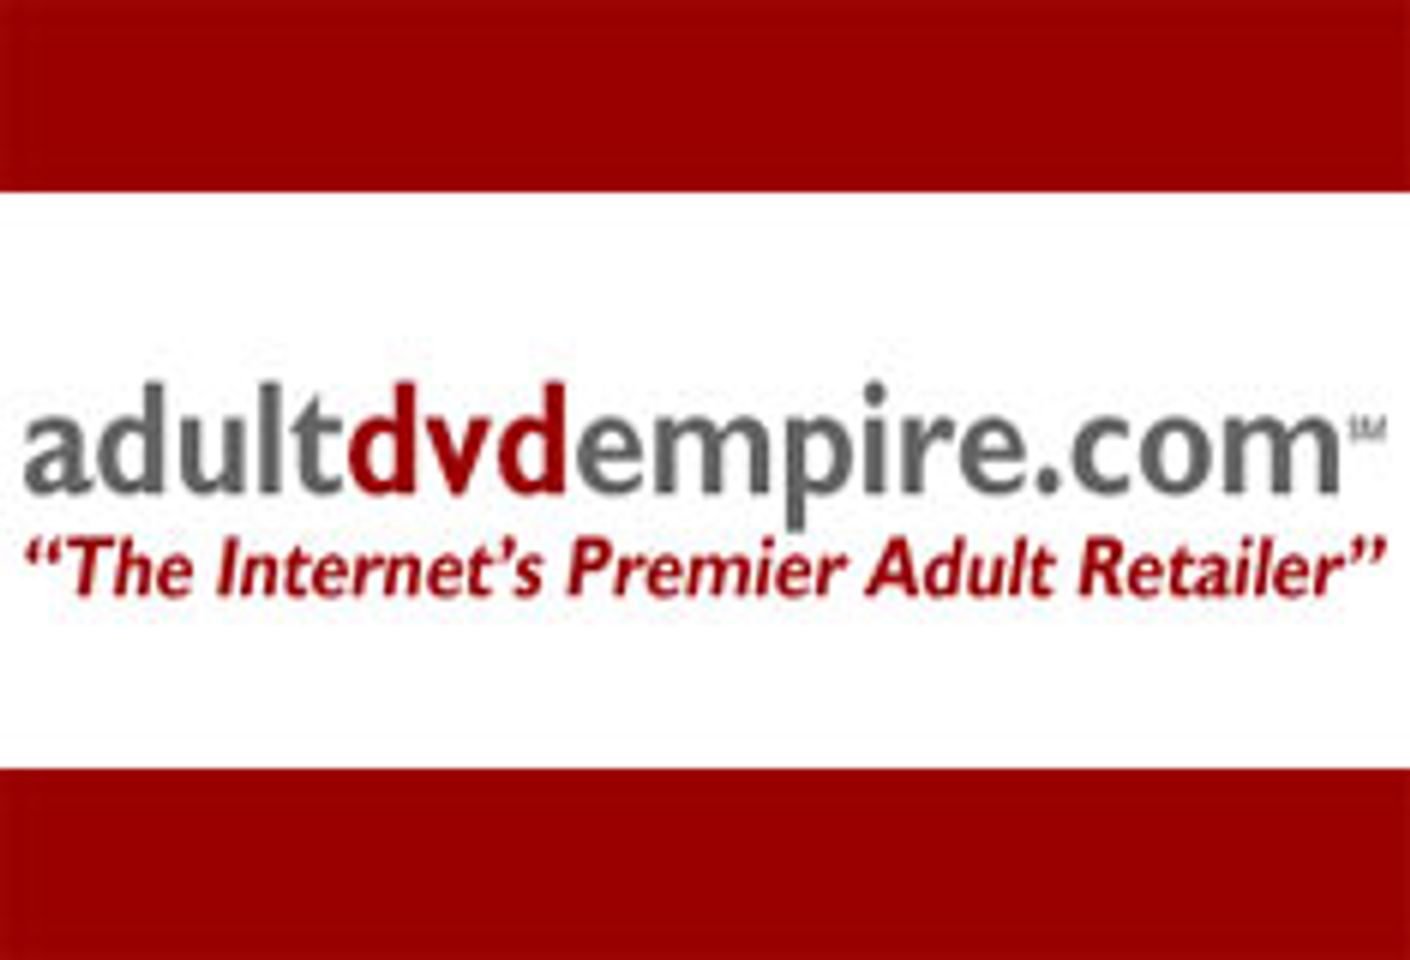 Adult DVD Empire Launches 2257 Sale